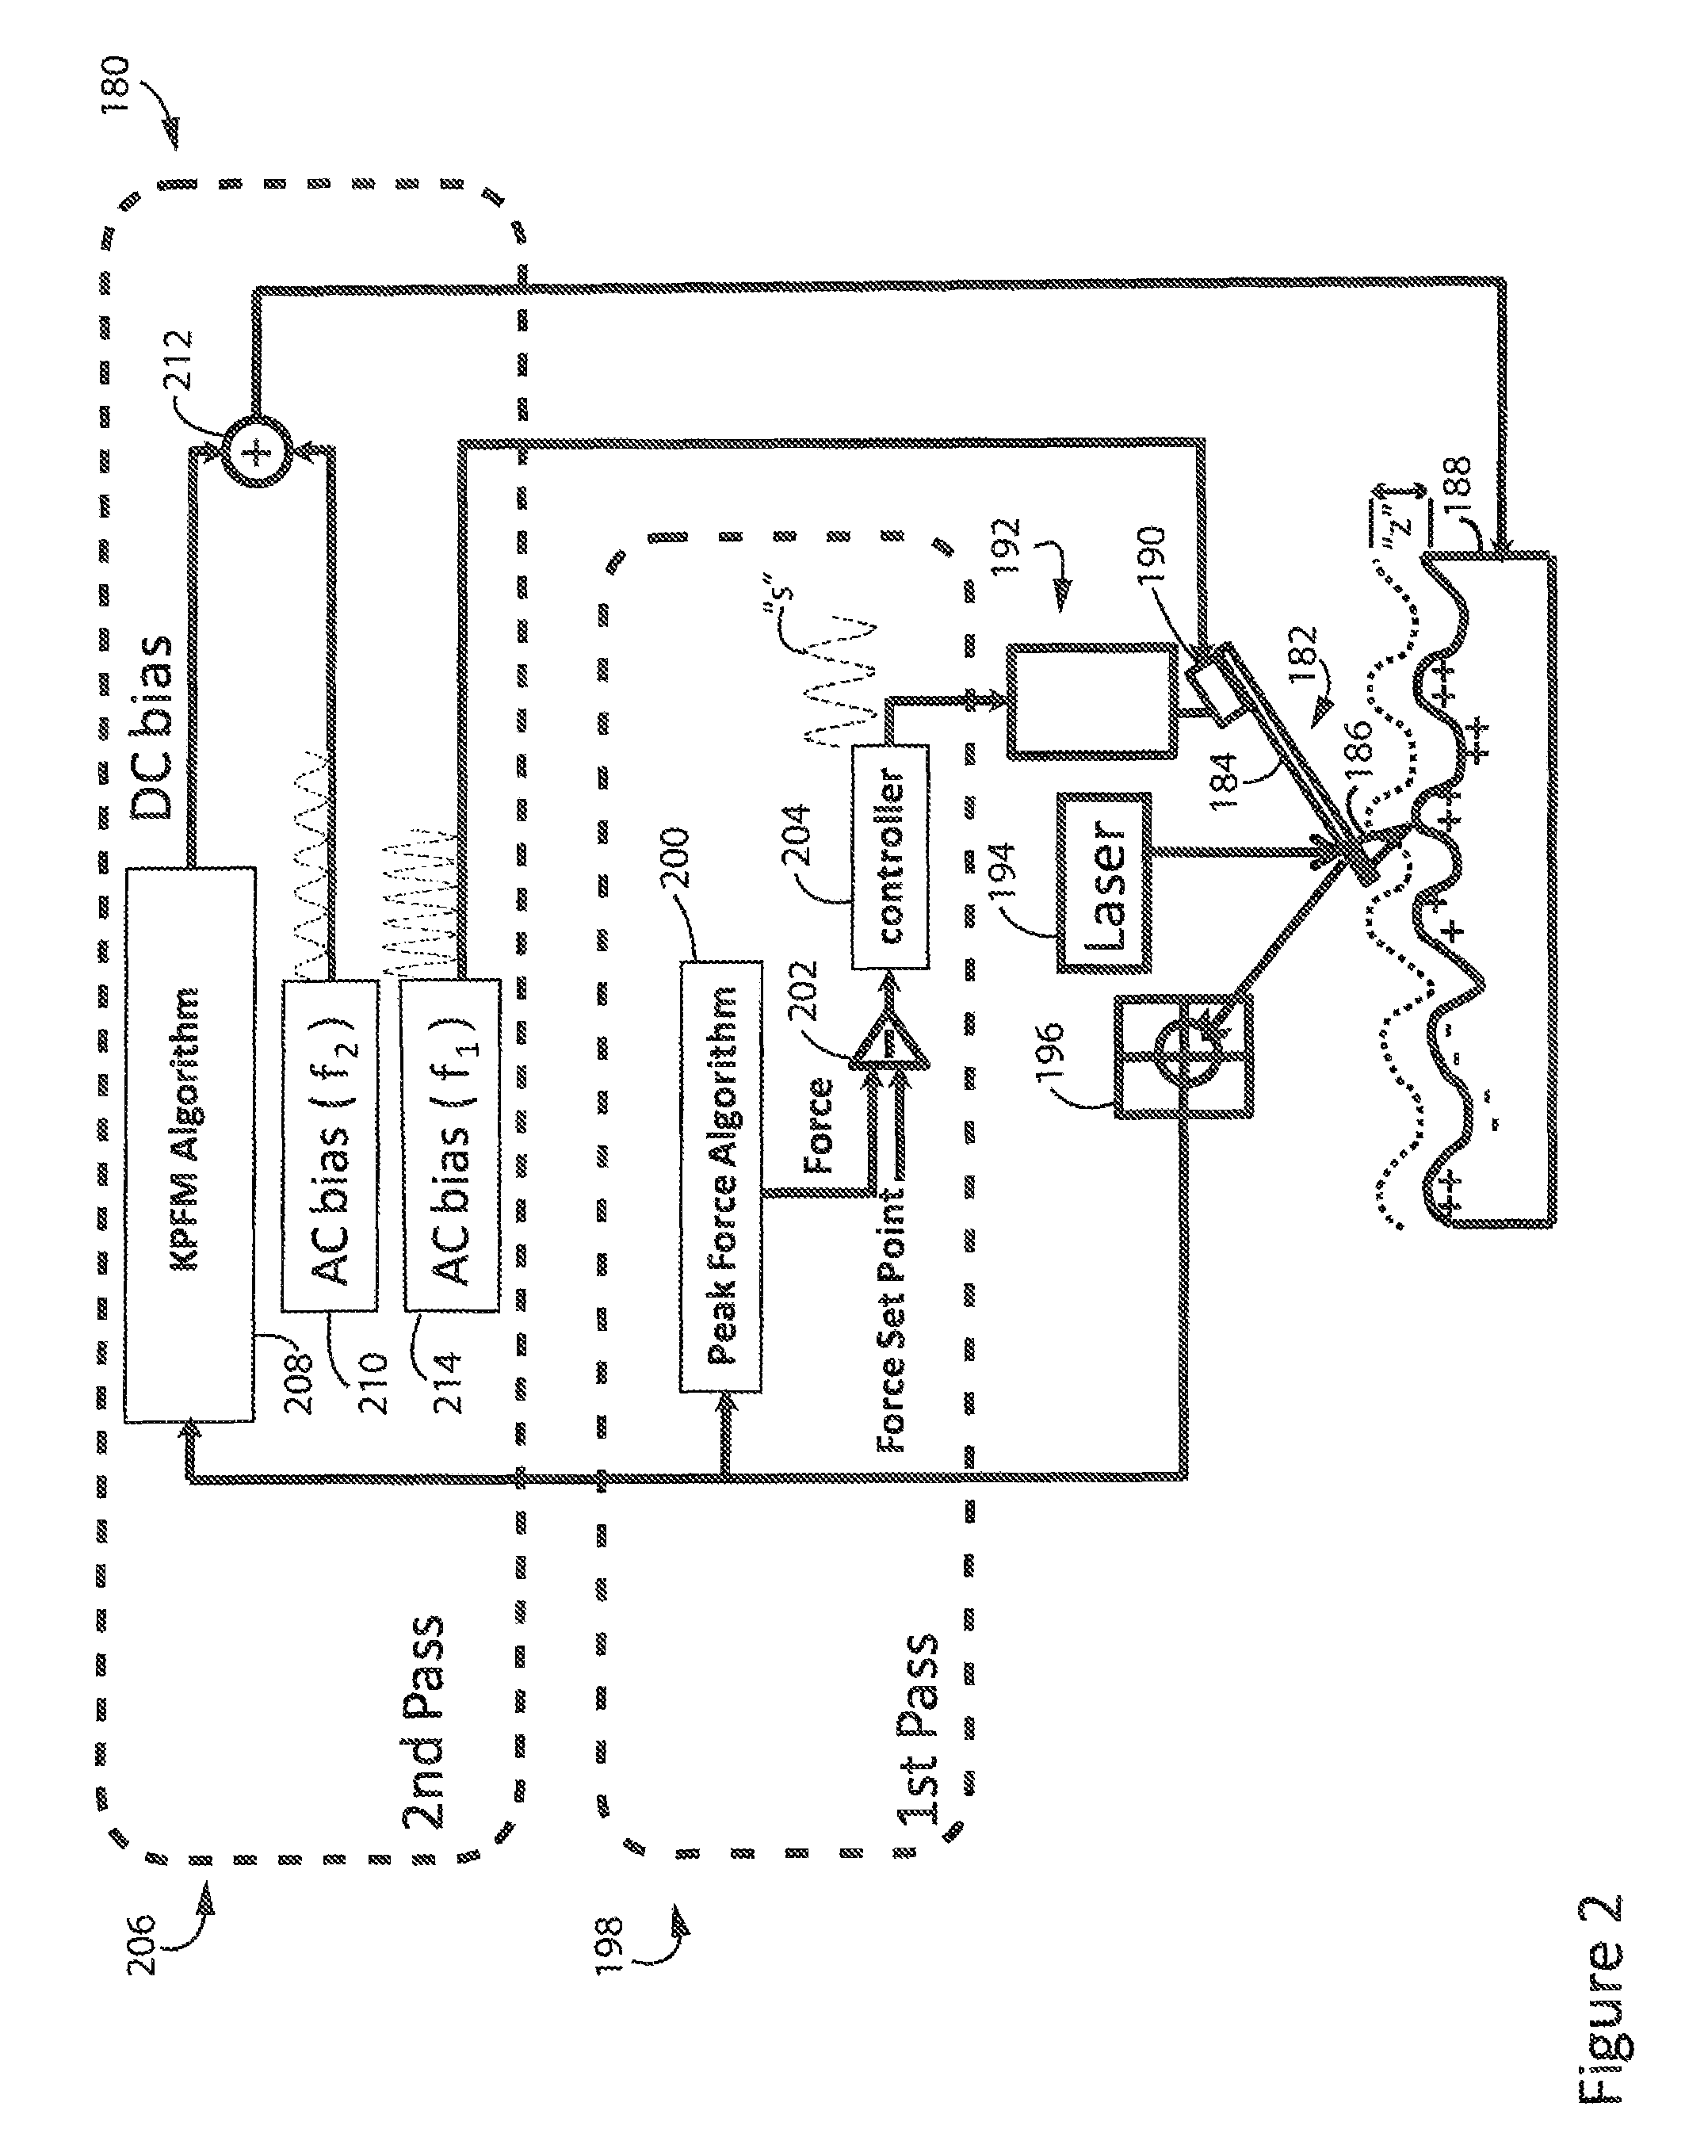 Method and apparatus of electrical property measurement using an AFM operating in peak force tapping mode